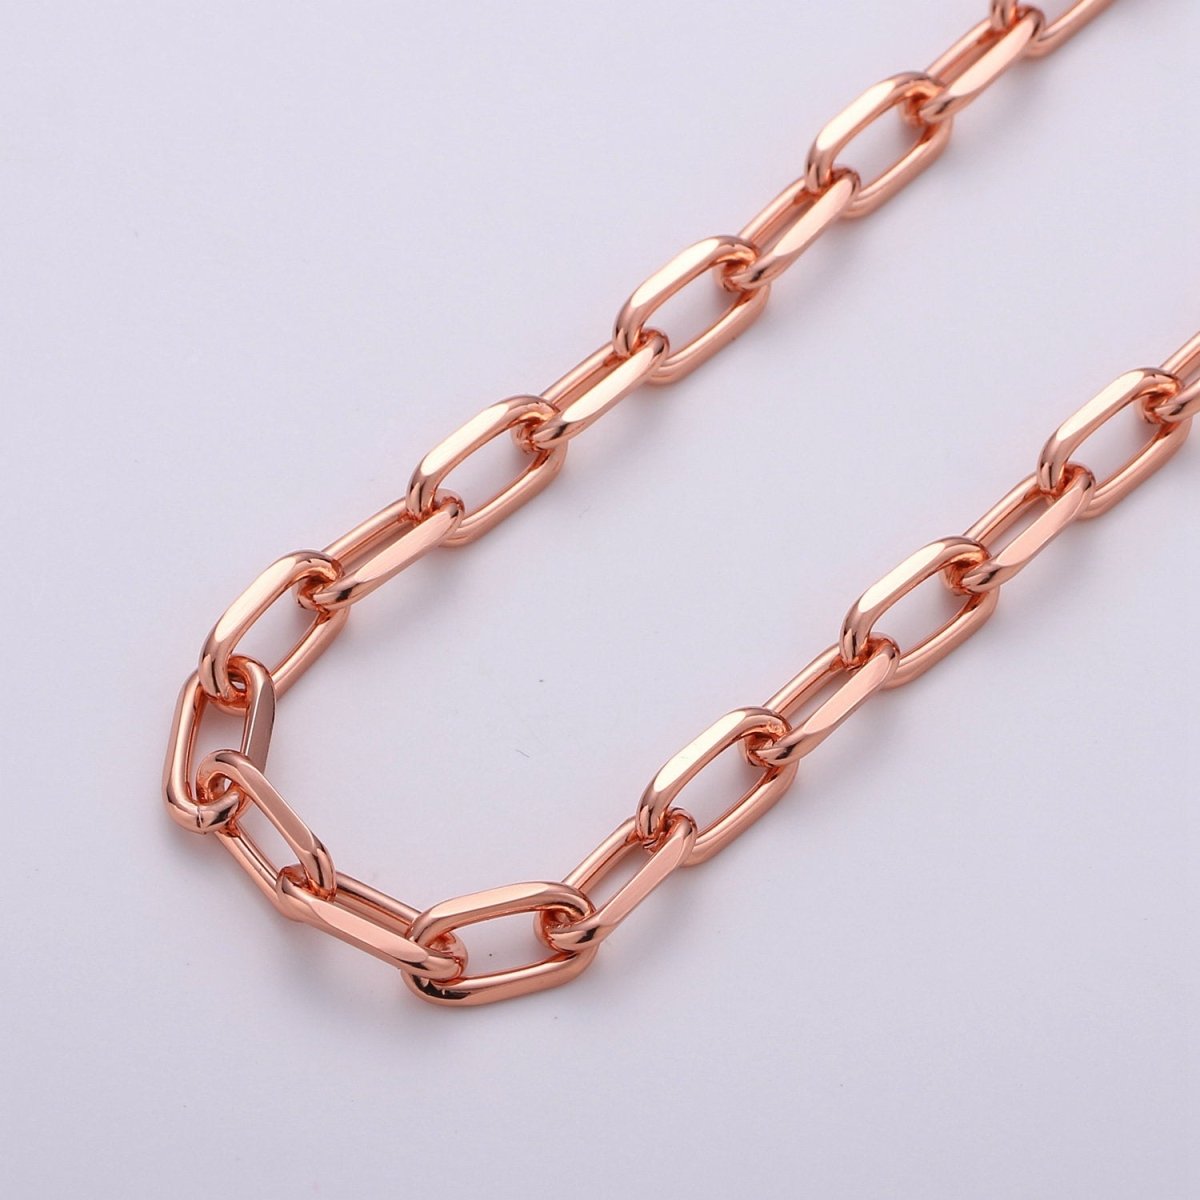 24K Gold Filled Chain Fashion CABLE Chain - Silver, Rose Gold, Black Chunky Chain, 12X7mm 2mm Thick Chain | ROLL-143, ROLL-144, ROLL-145, ROLL-146 Clearance Pricing - DLUXCA